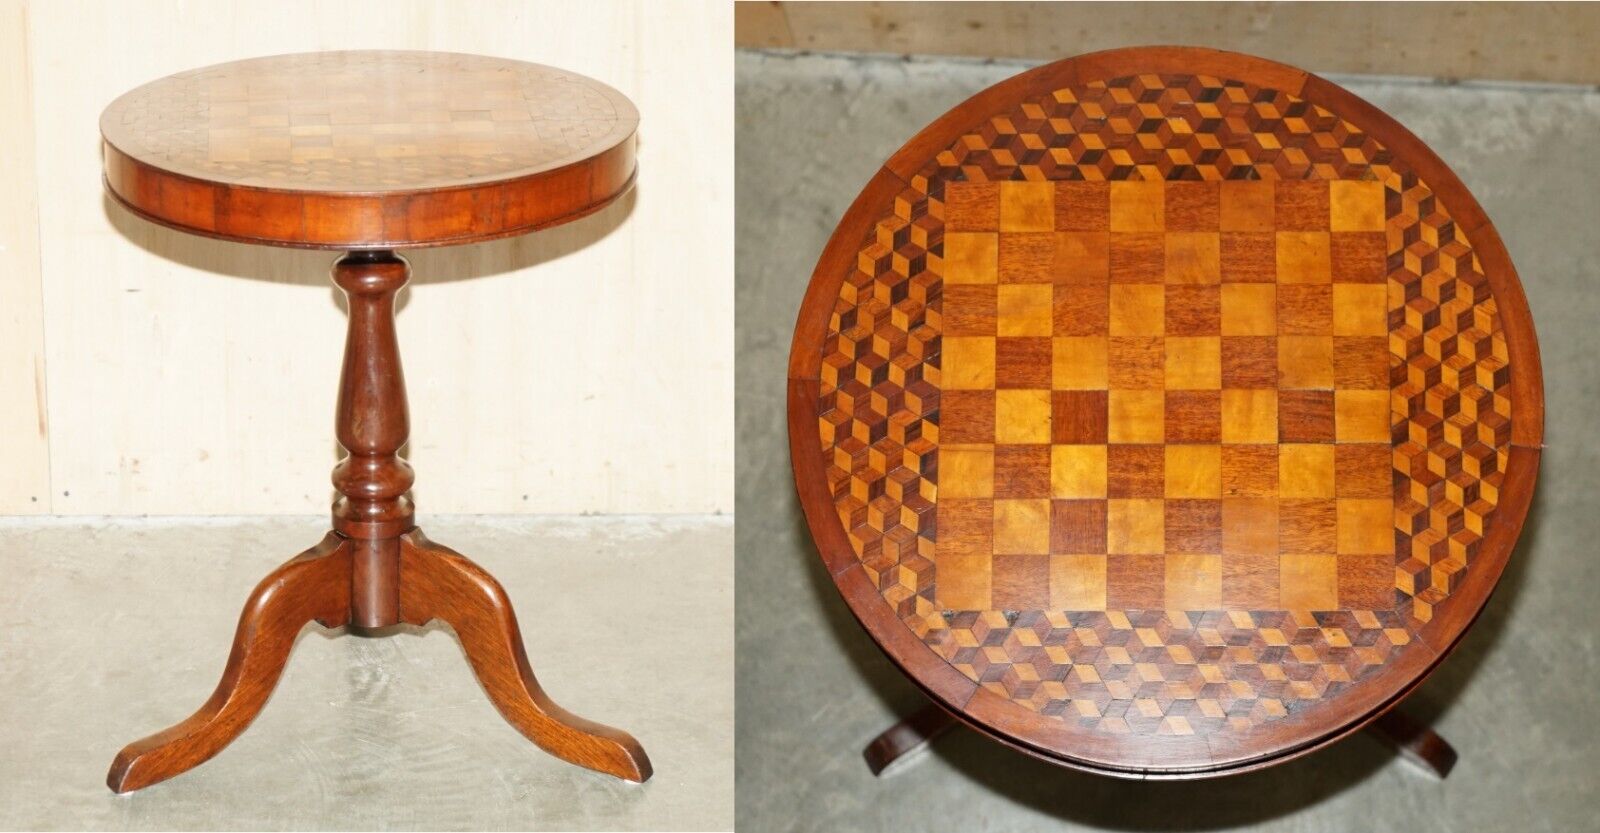 ANTIQUE VICTORIAN WALNUT & MAHOGANY PARQUETRY INLAID TILT TOP CHESS GAMES TABLE